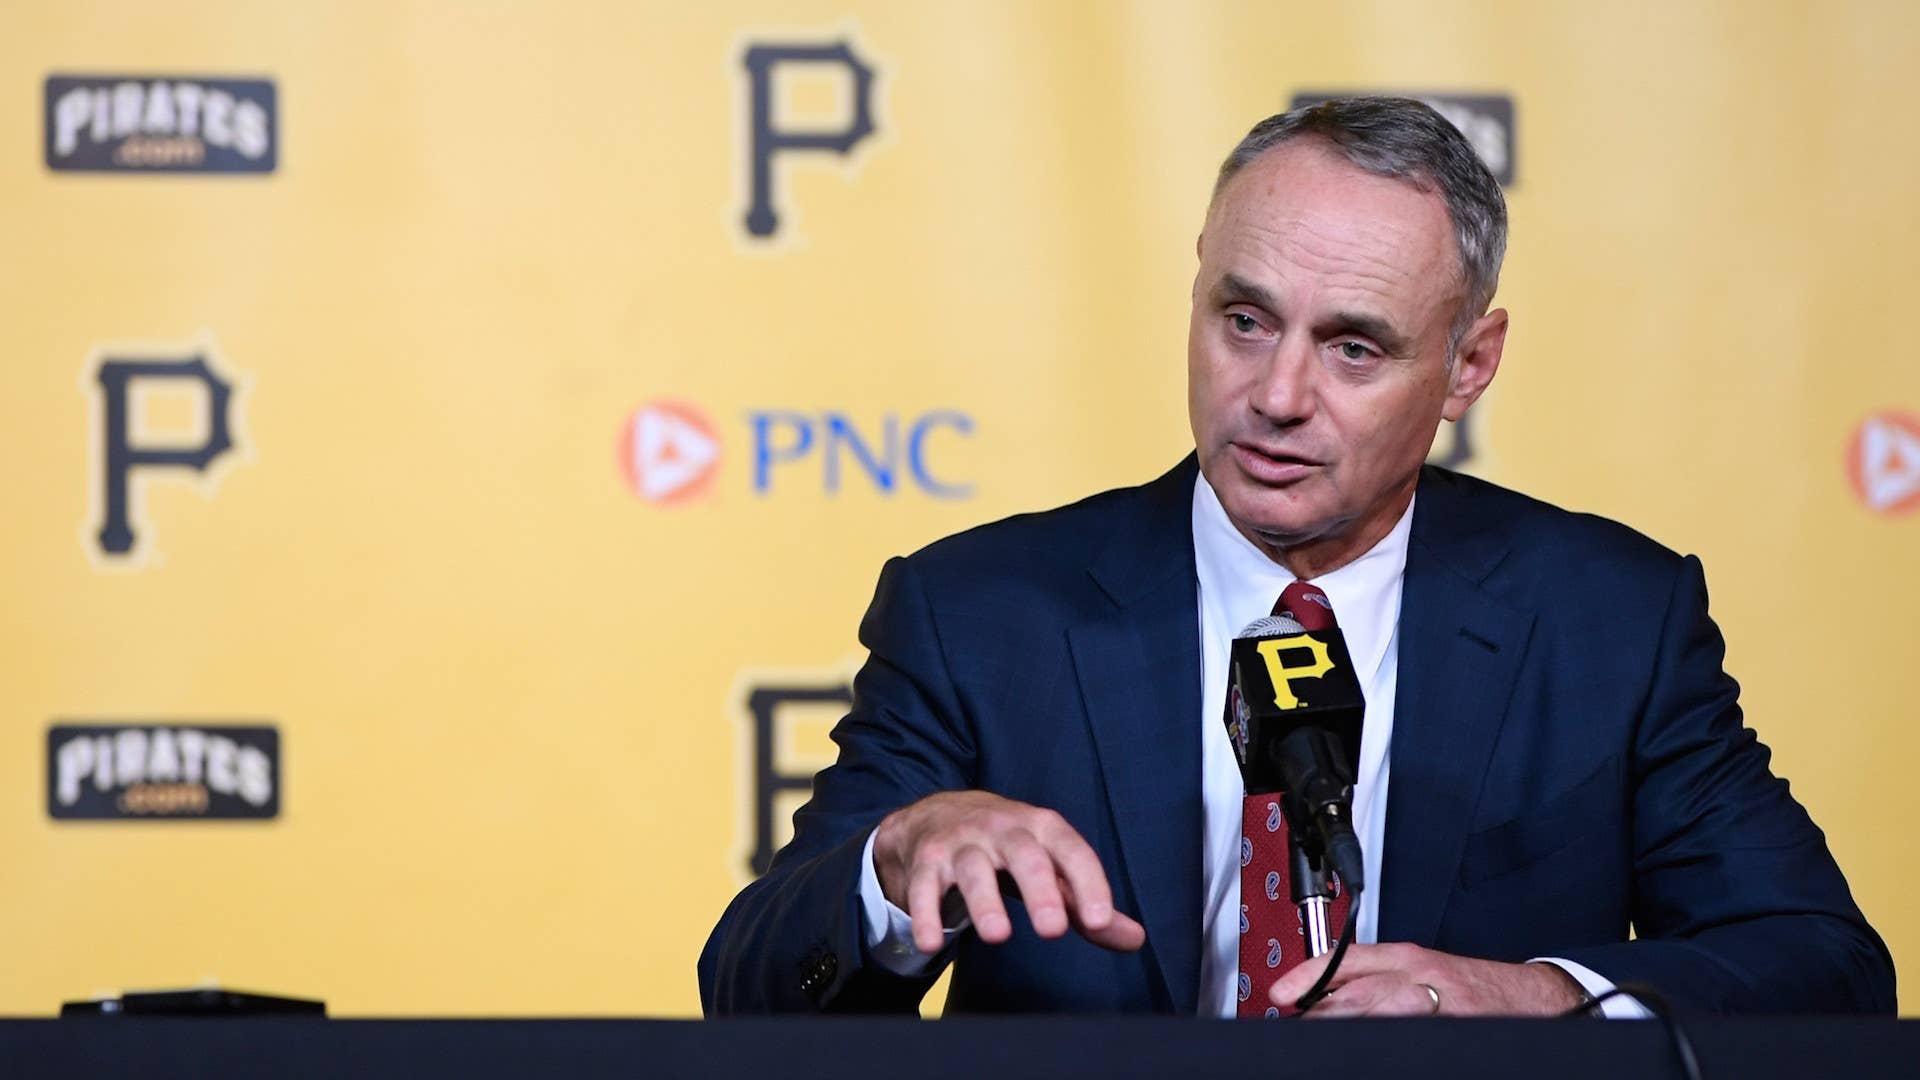 Commissioner of Baseball Robert Manfred answers questions